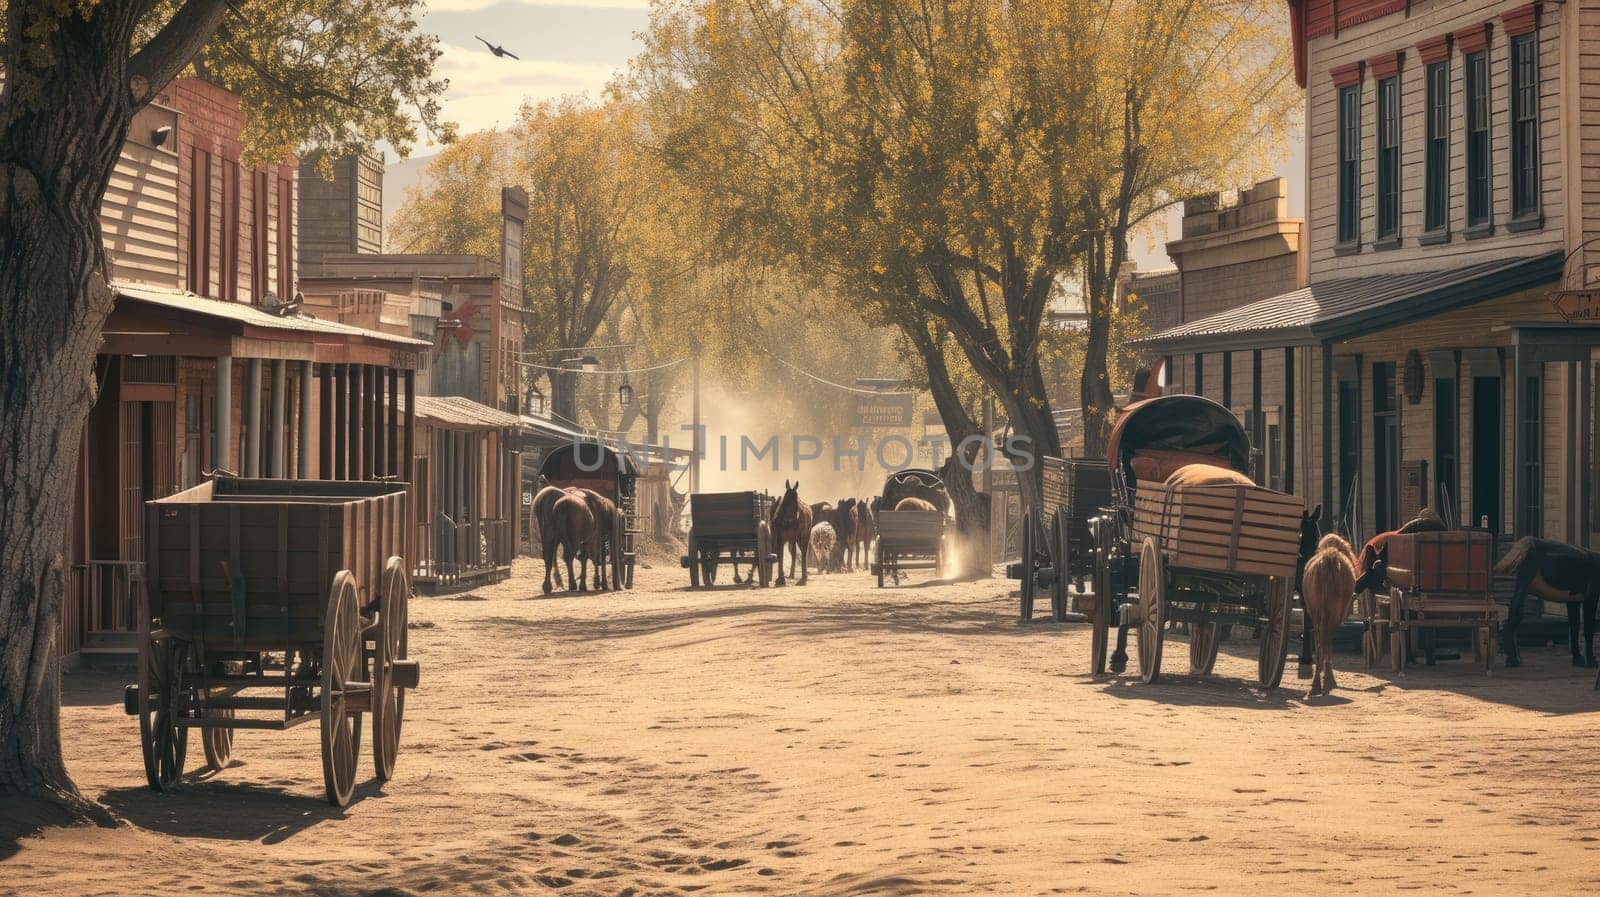 A captivating scene of a Western town at sunset, featuring horse-drawn carriages and vintage storefronts bathed in a dusty golden light. Resplendent.